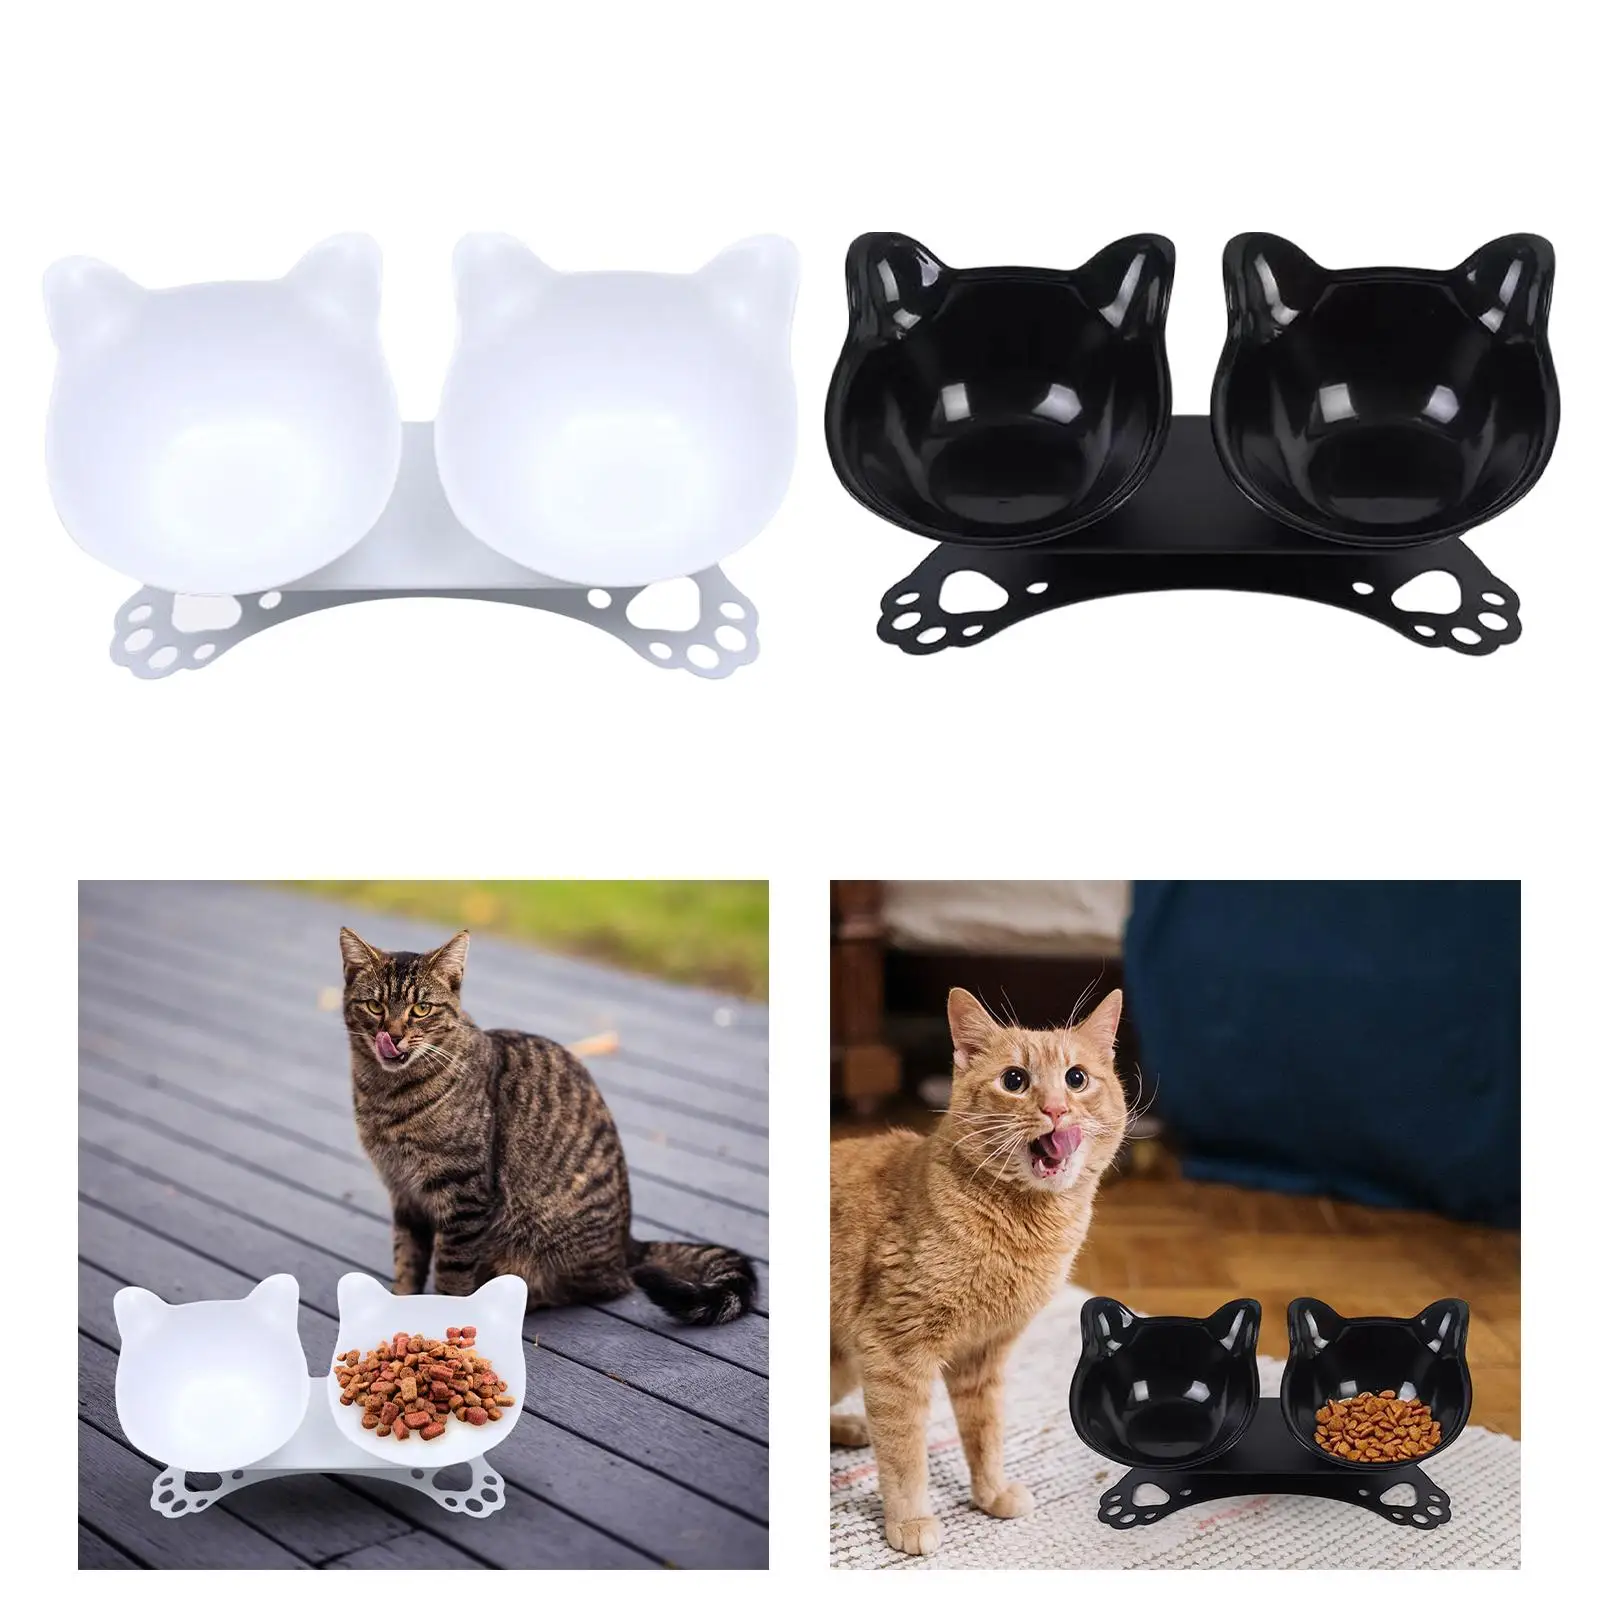 Cat Elevated Double Bowls Raised Pet Water Food Feeder Durable Detachable Feeding Dishes for Small Dogs Puppy Kitten Accessories